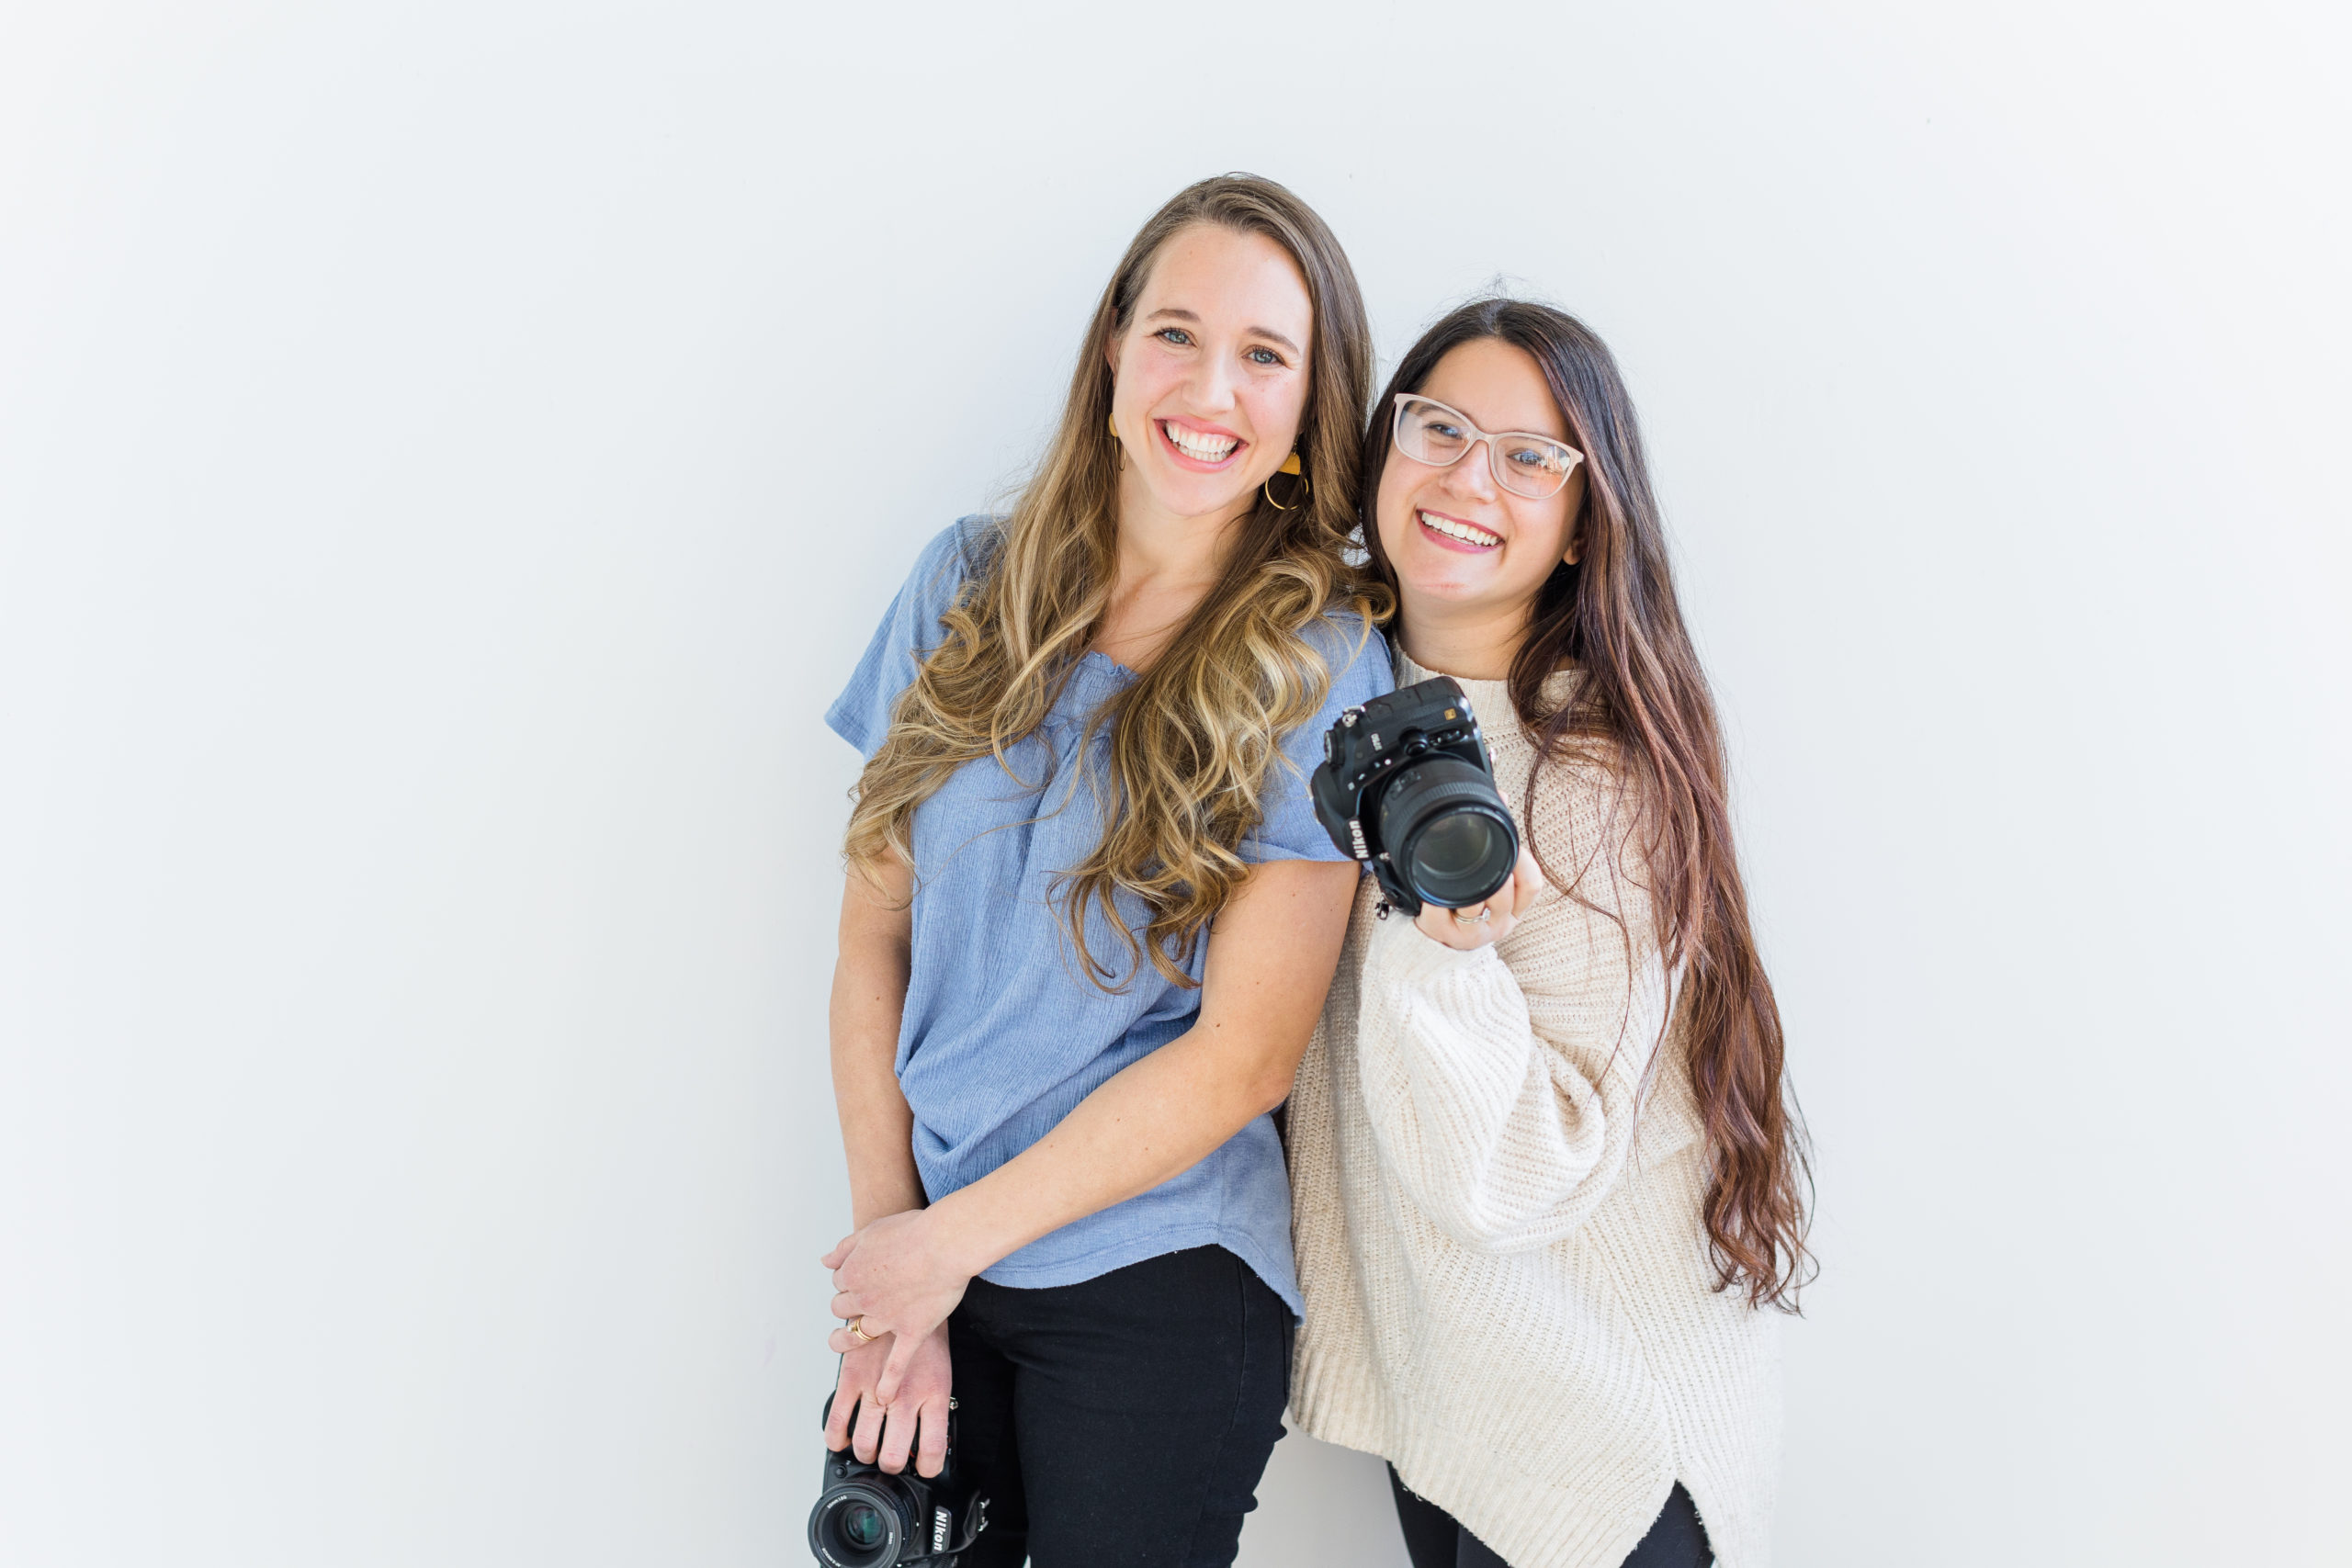 stephanie is wearing a blue shirt and black pants. christi is wearing a white sweater and black leggings. they are both smiling at the camera and christi is holding her camera